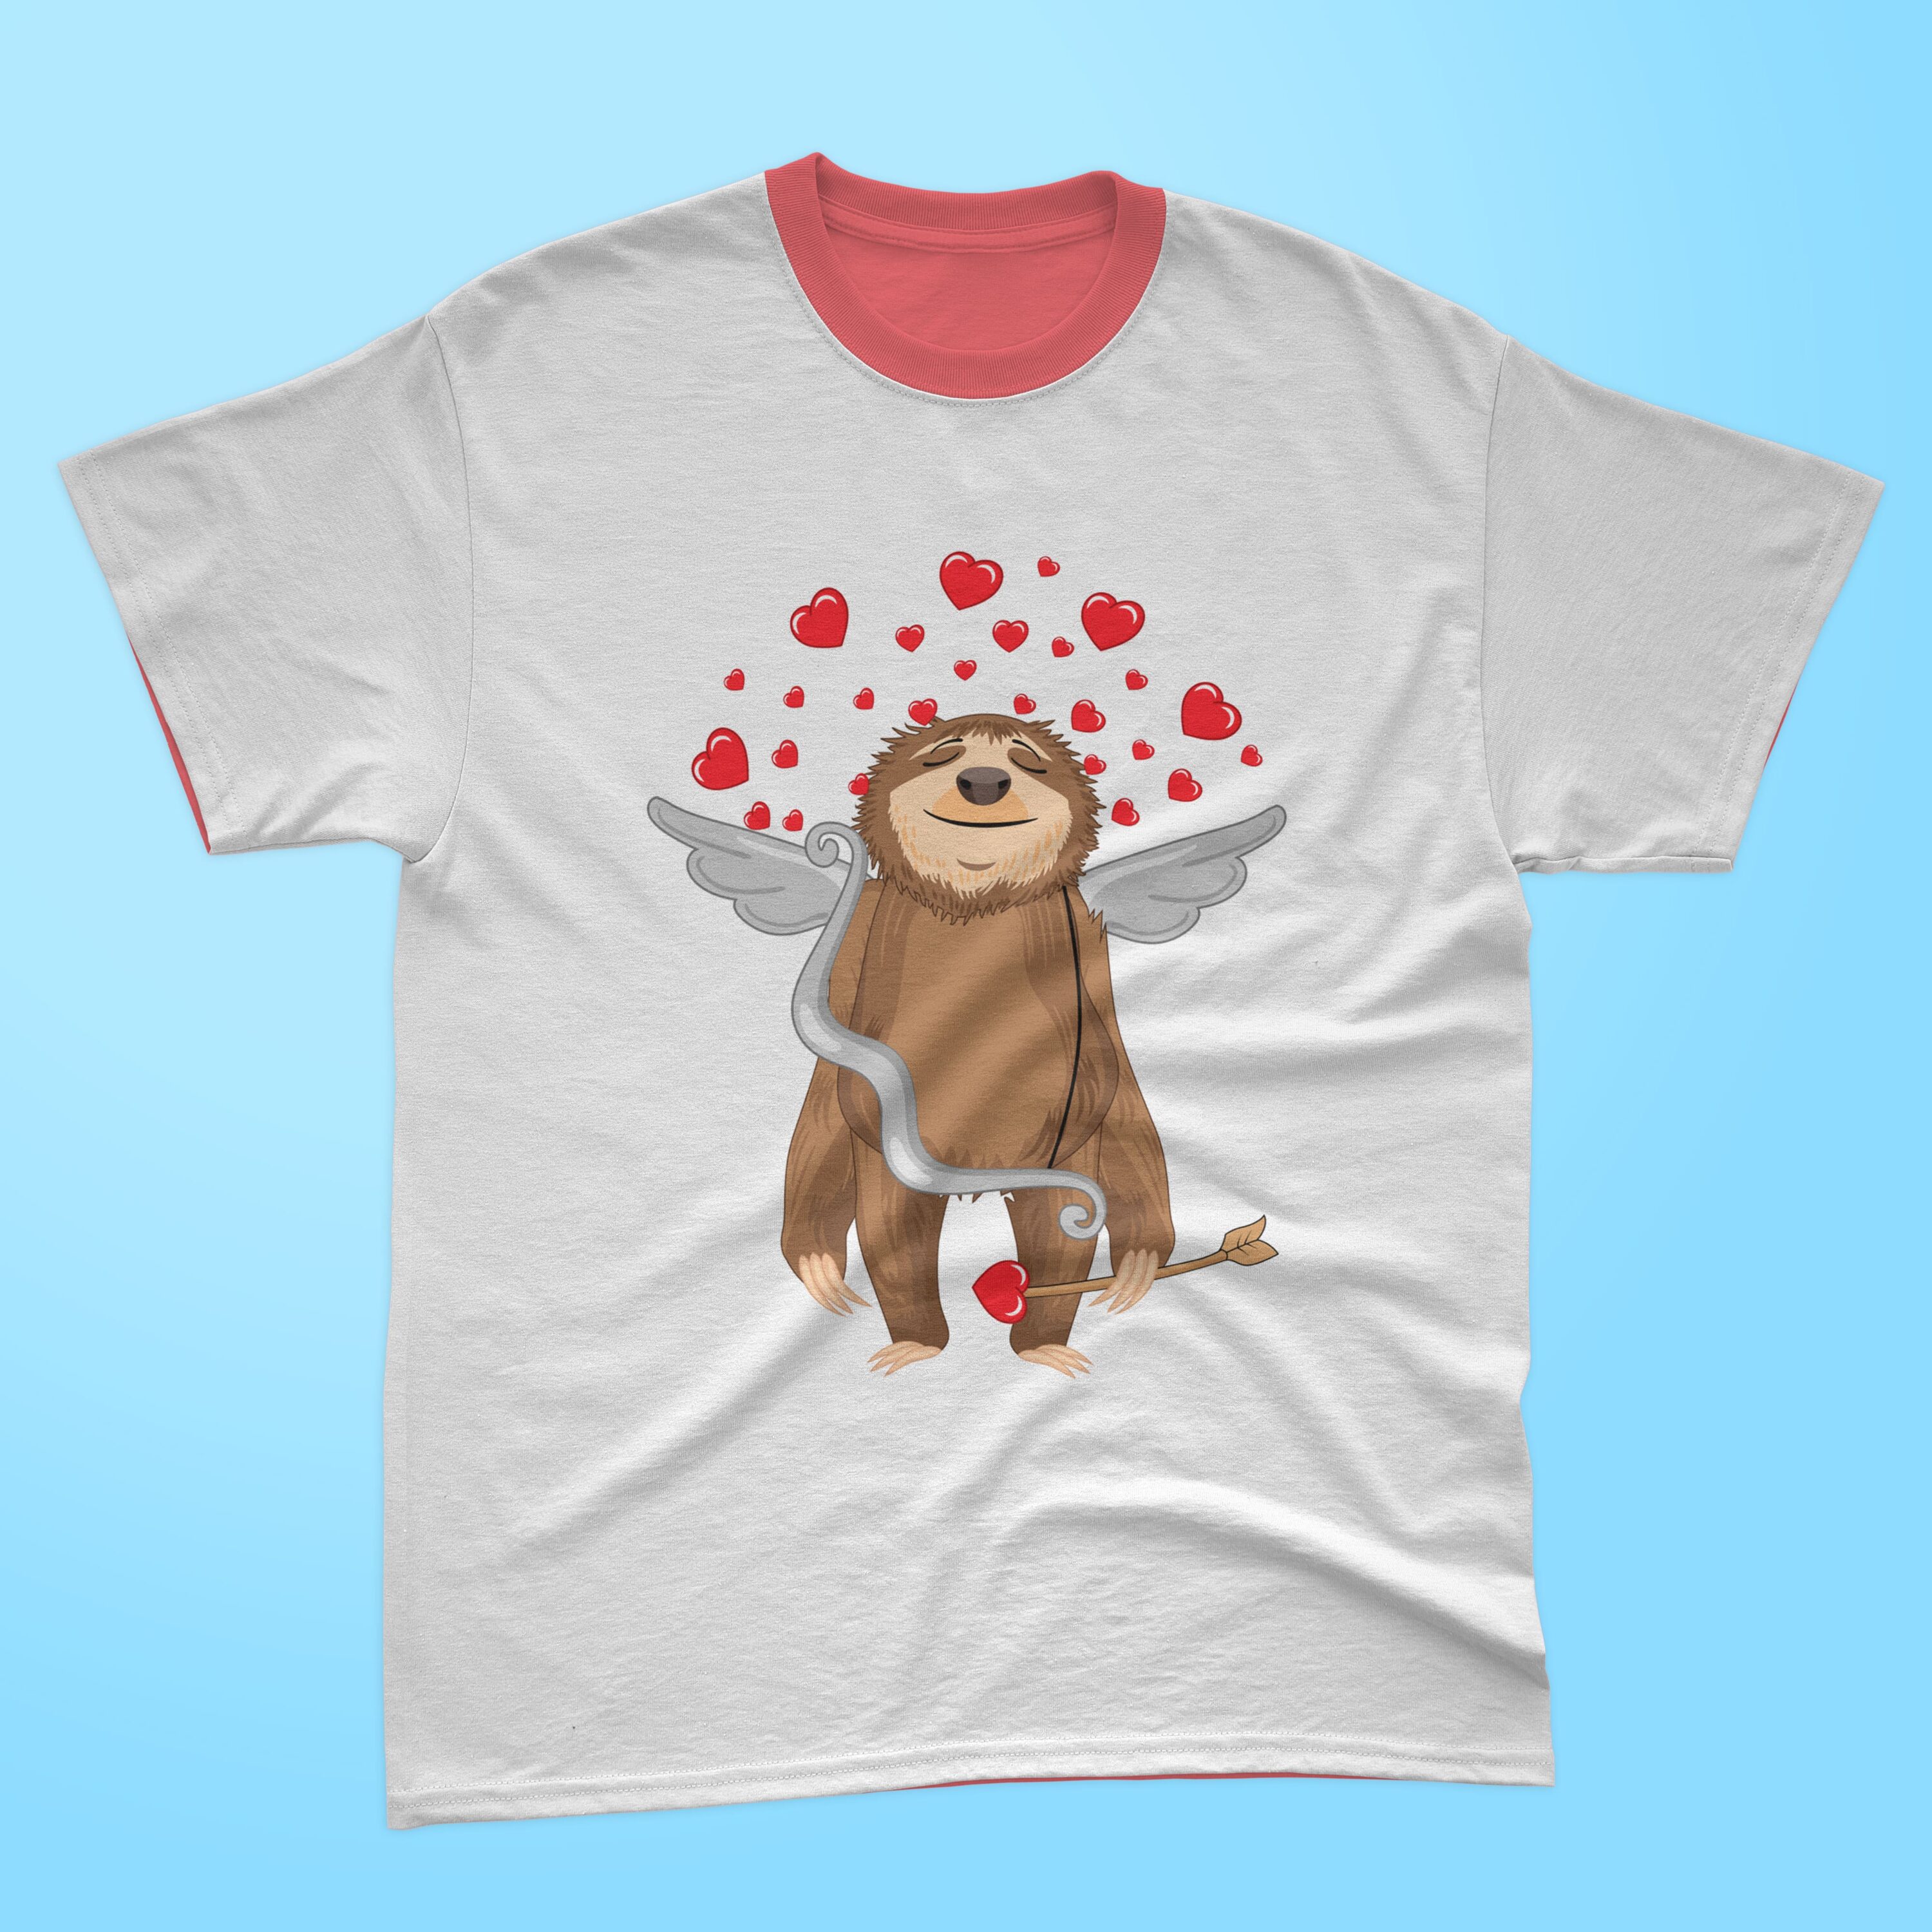 Image of a white t-shirt with an enchanting print of a sloth cupid.